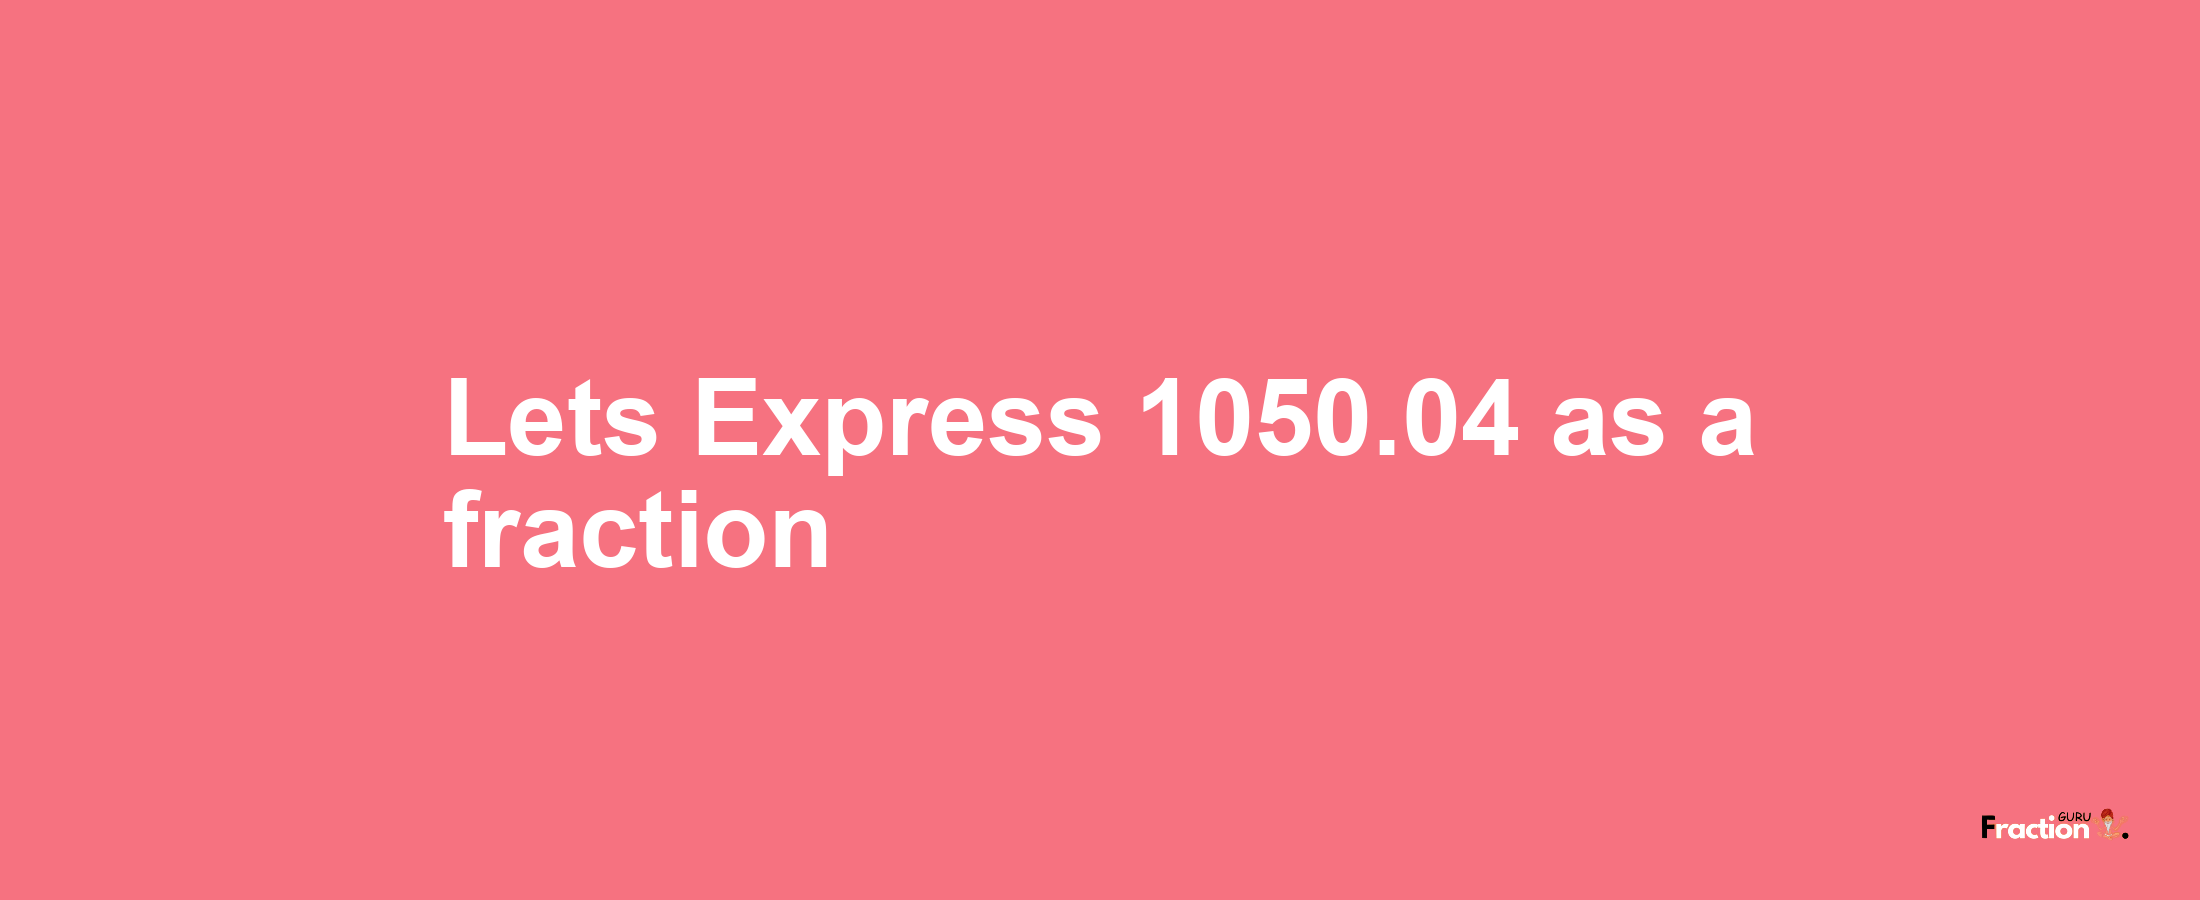 Lets Express 1050.04 as afraction